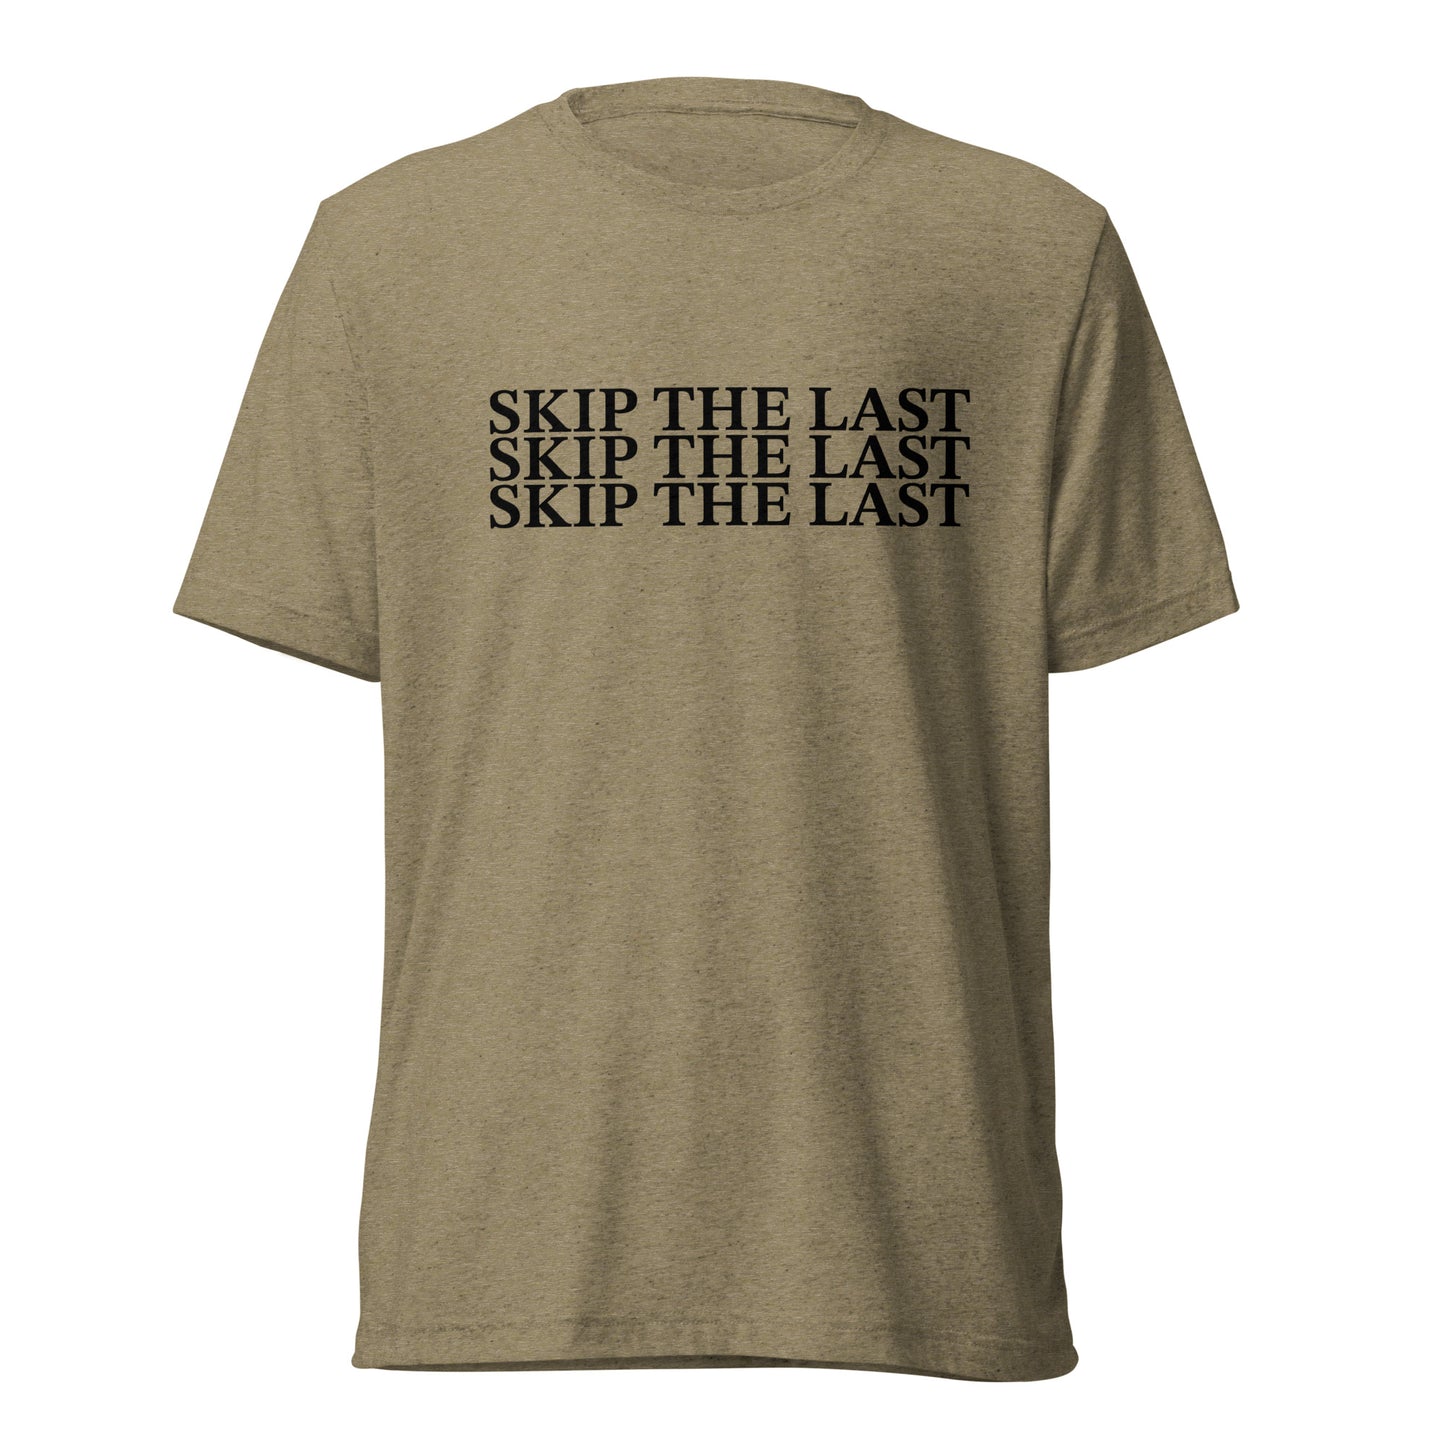 Two More Skip The Last "Skip the Last x3" olive unisex tri-blend t-shirt. Front view